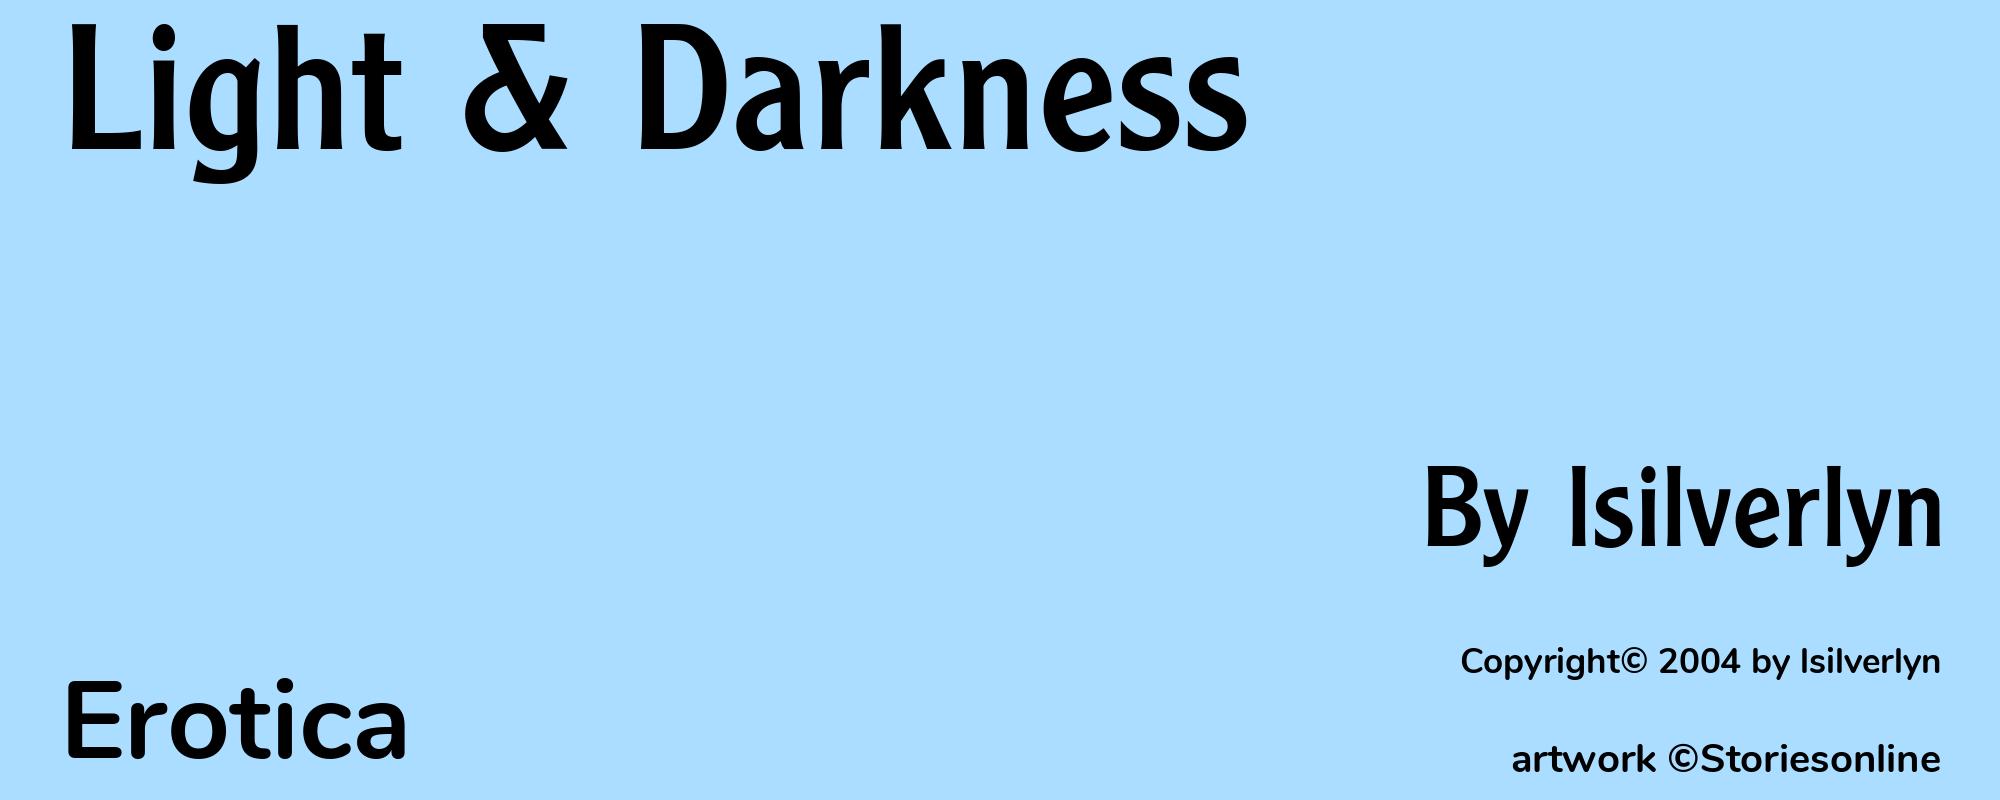 Light & Darkness - Cover